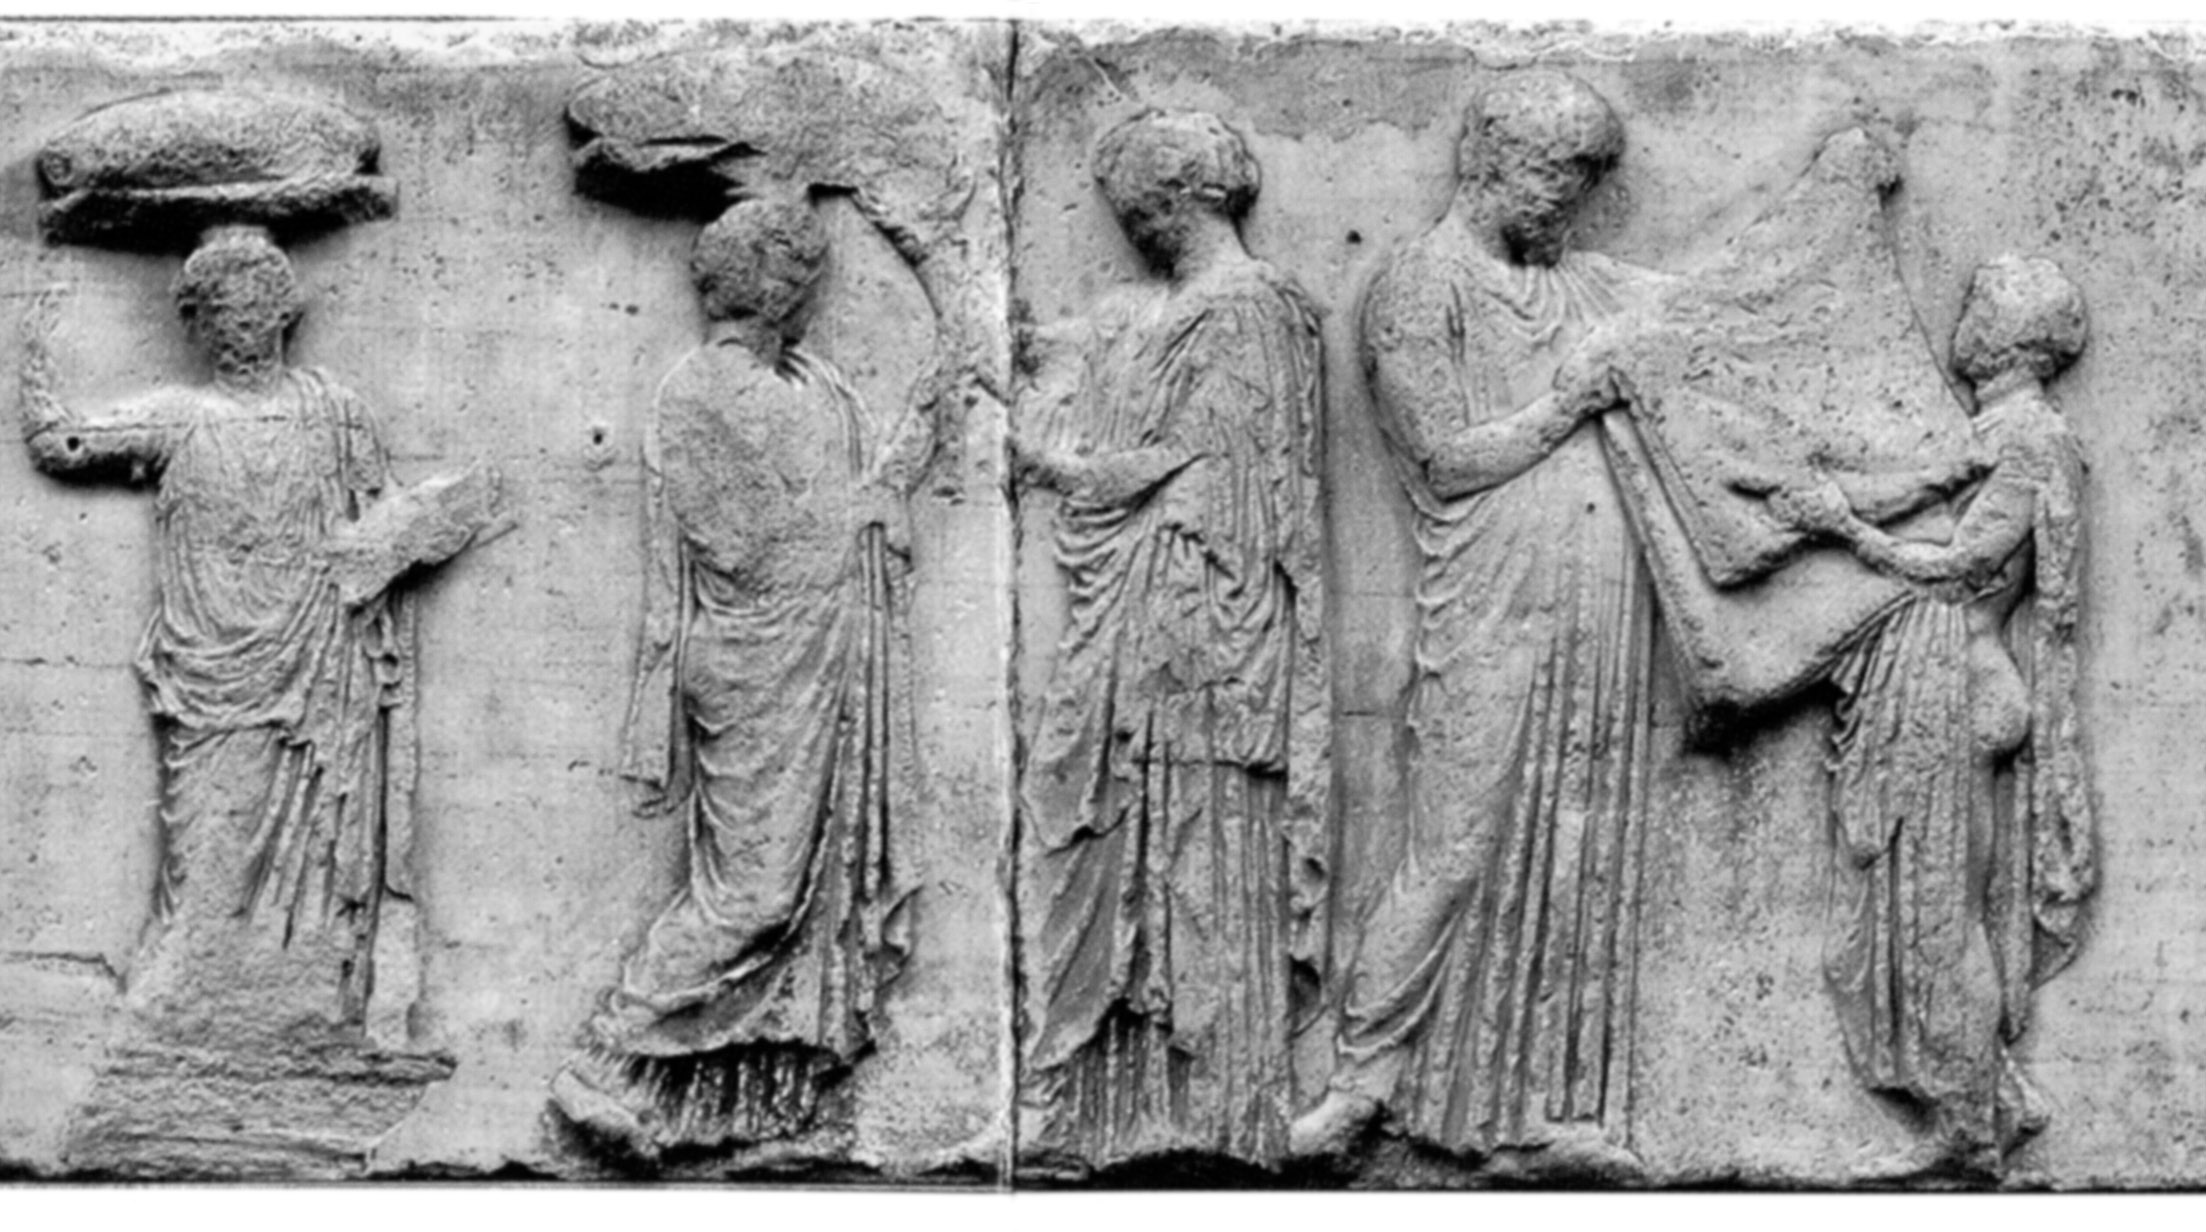 <p>Annual Athenian festival for Athena’s birthday - every four years they held the Great Panathenaia.</p><p>Contests were held - charioteering, footraces, music, poetry etc. Prizes were usually olive oil and money. </p><p>A hecatomb was sacrificed at Athene’s altar, best parts given to Athena Nike.</p><p>Civic officials, treasurers, generals, and maidens who carried vessels were given their share on the acropolis. The remaining meat was distributed in the cemetery.</p>